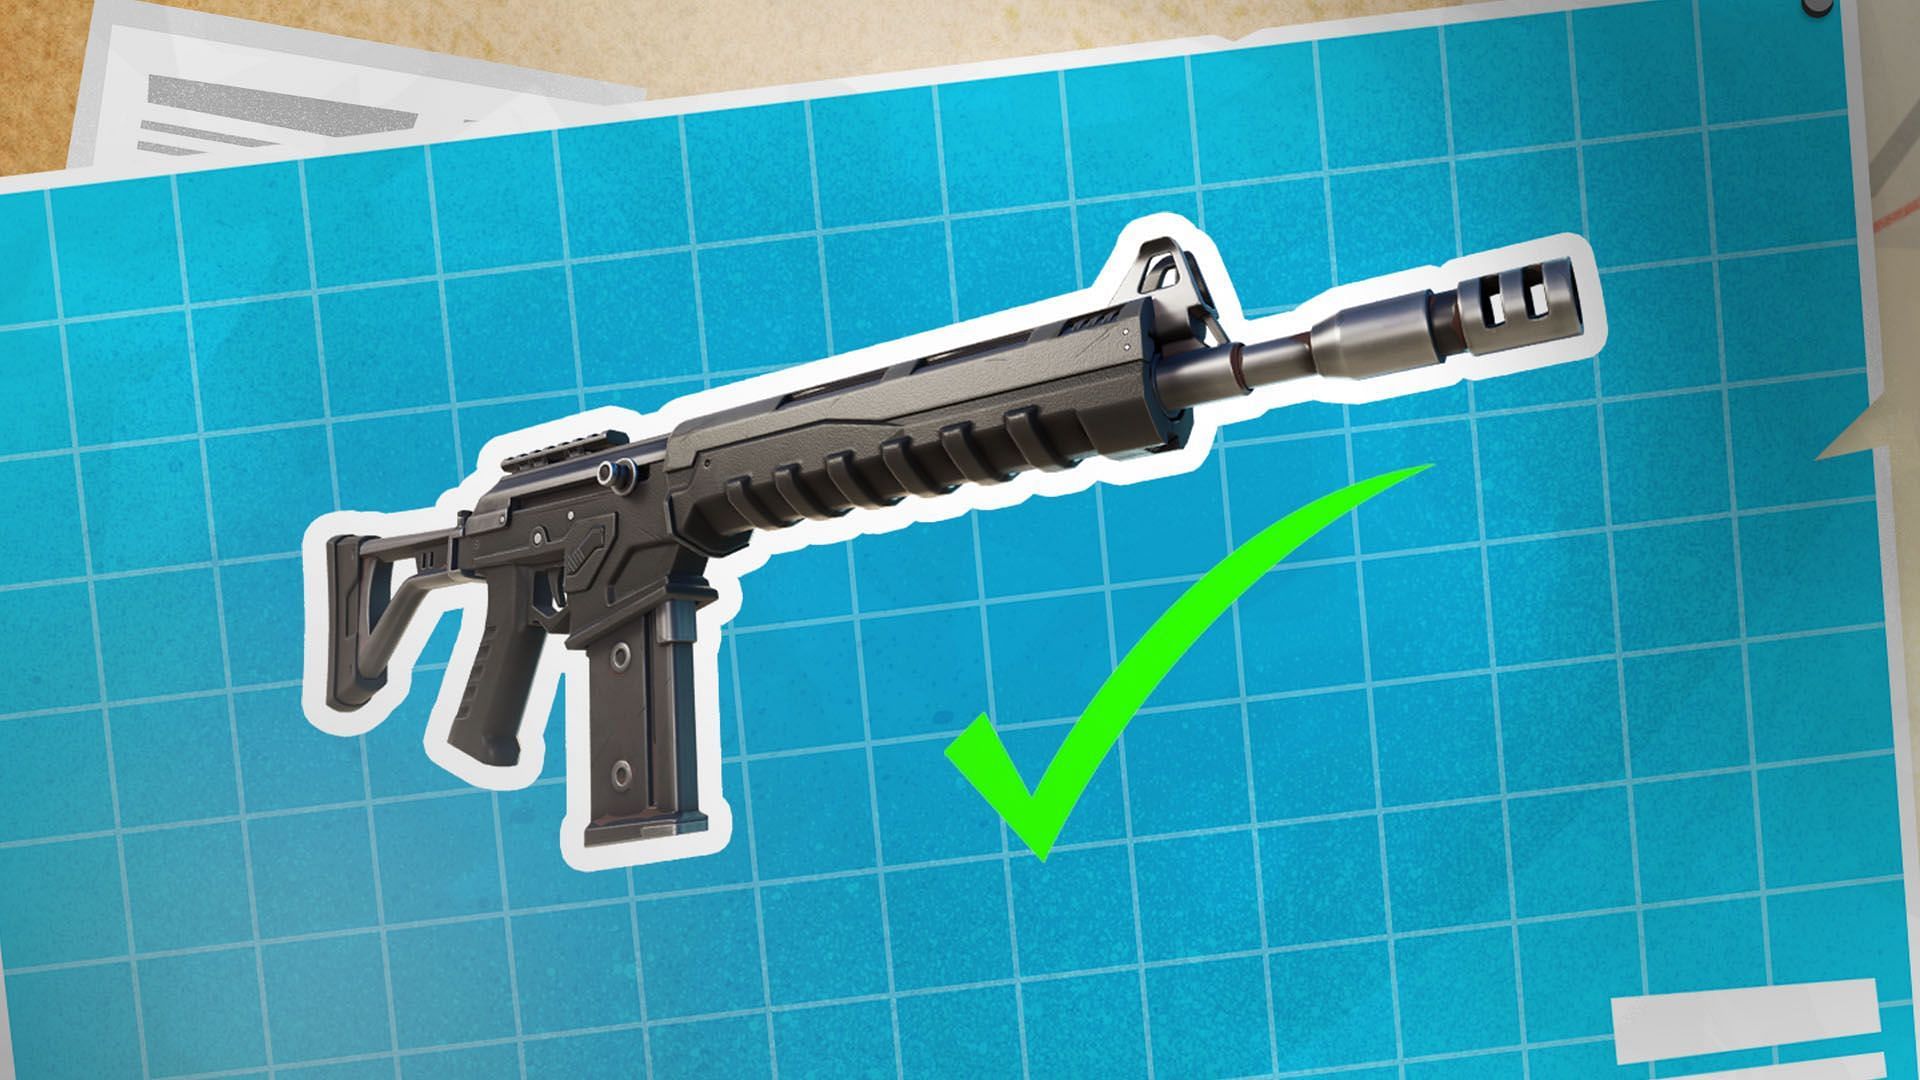 The Combat Assault Rifle in Fortnite has been funded by gamers (Image via Fortnite News/Twitter)